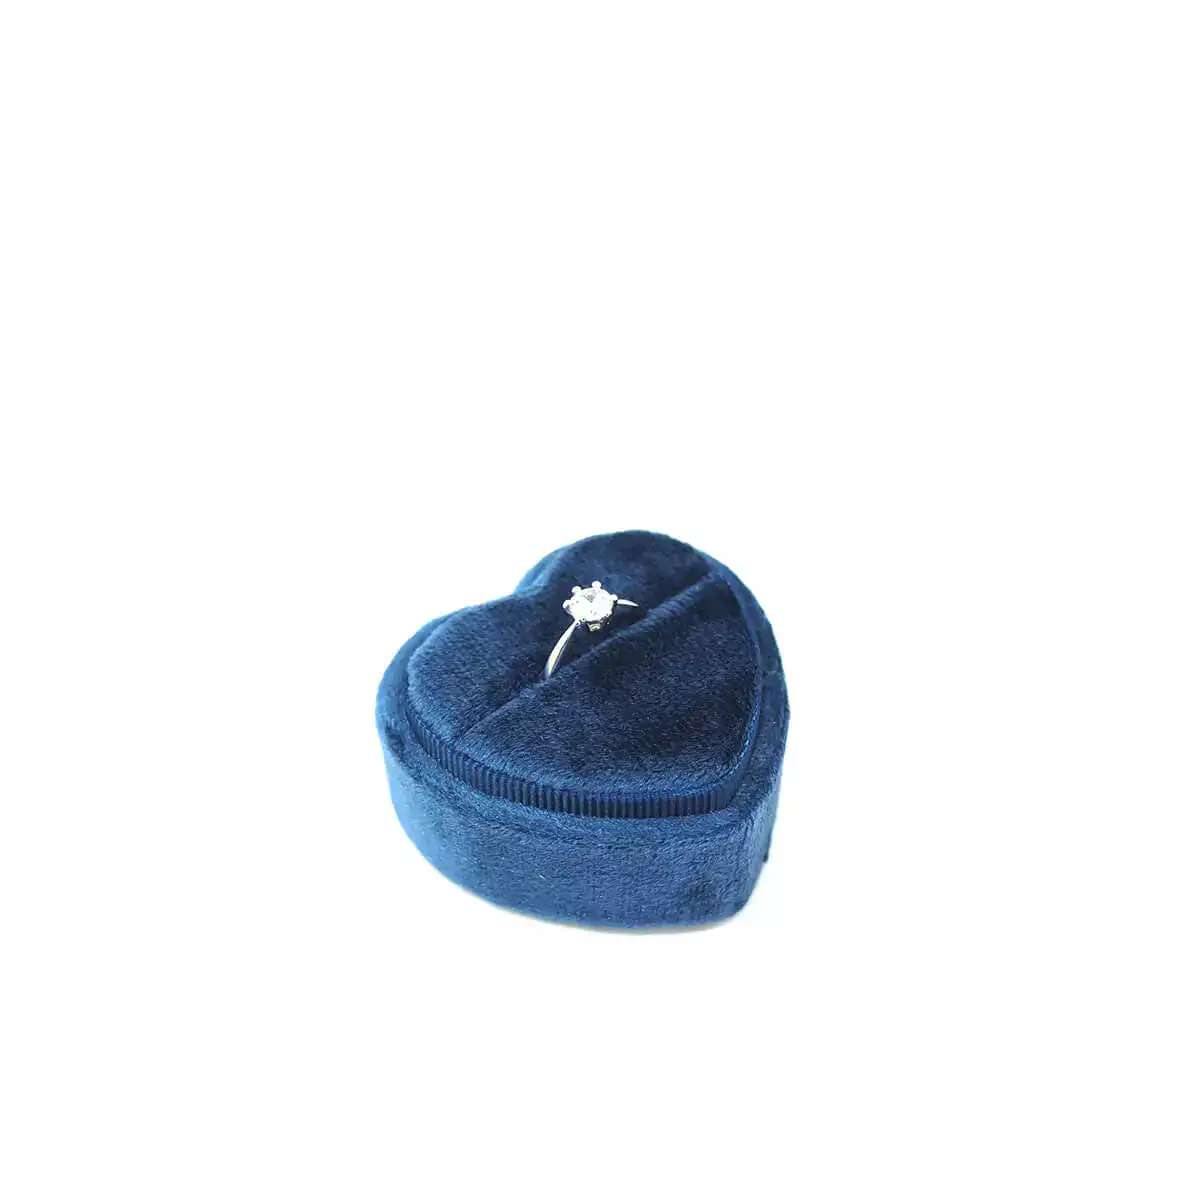 Vera Ring Box in Blue Opening Left Side View